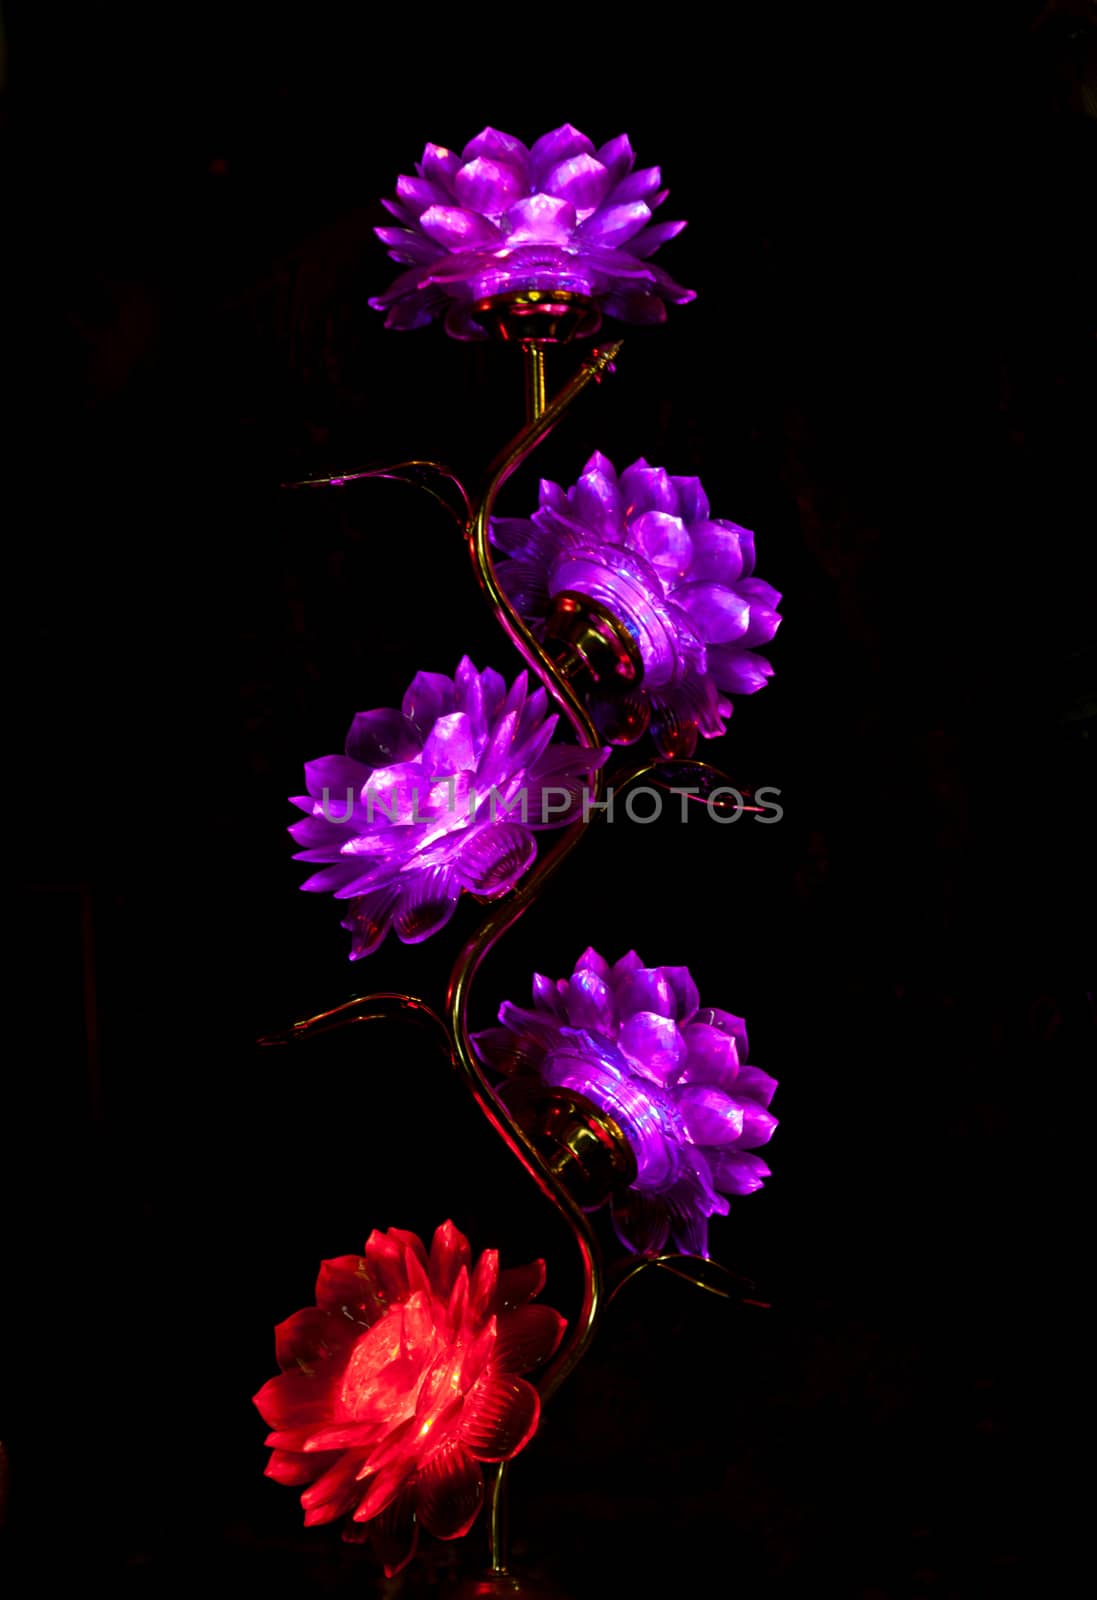 Flower lamp in a darkness of a buddhist Temple, Vietnam